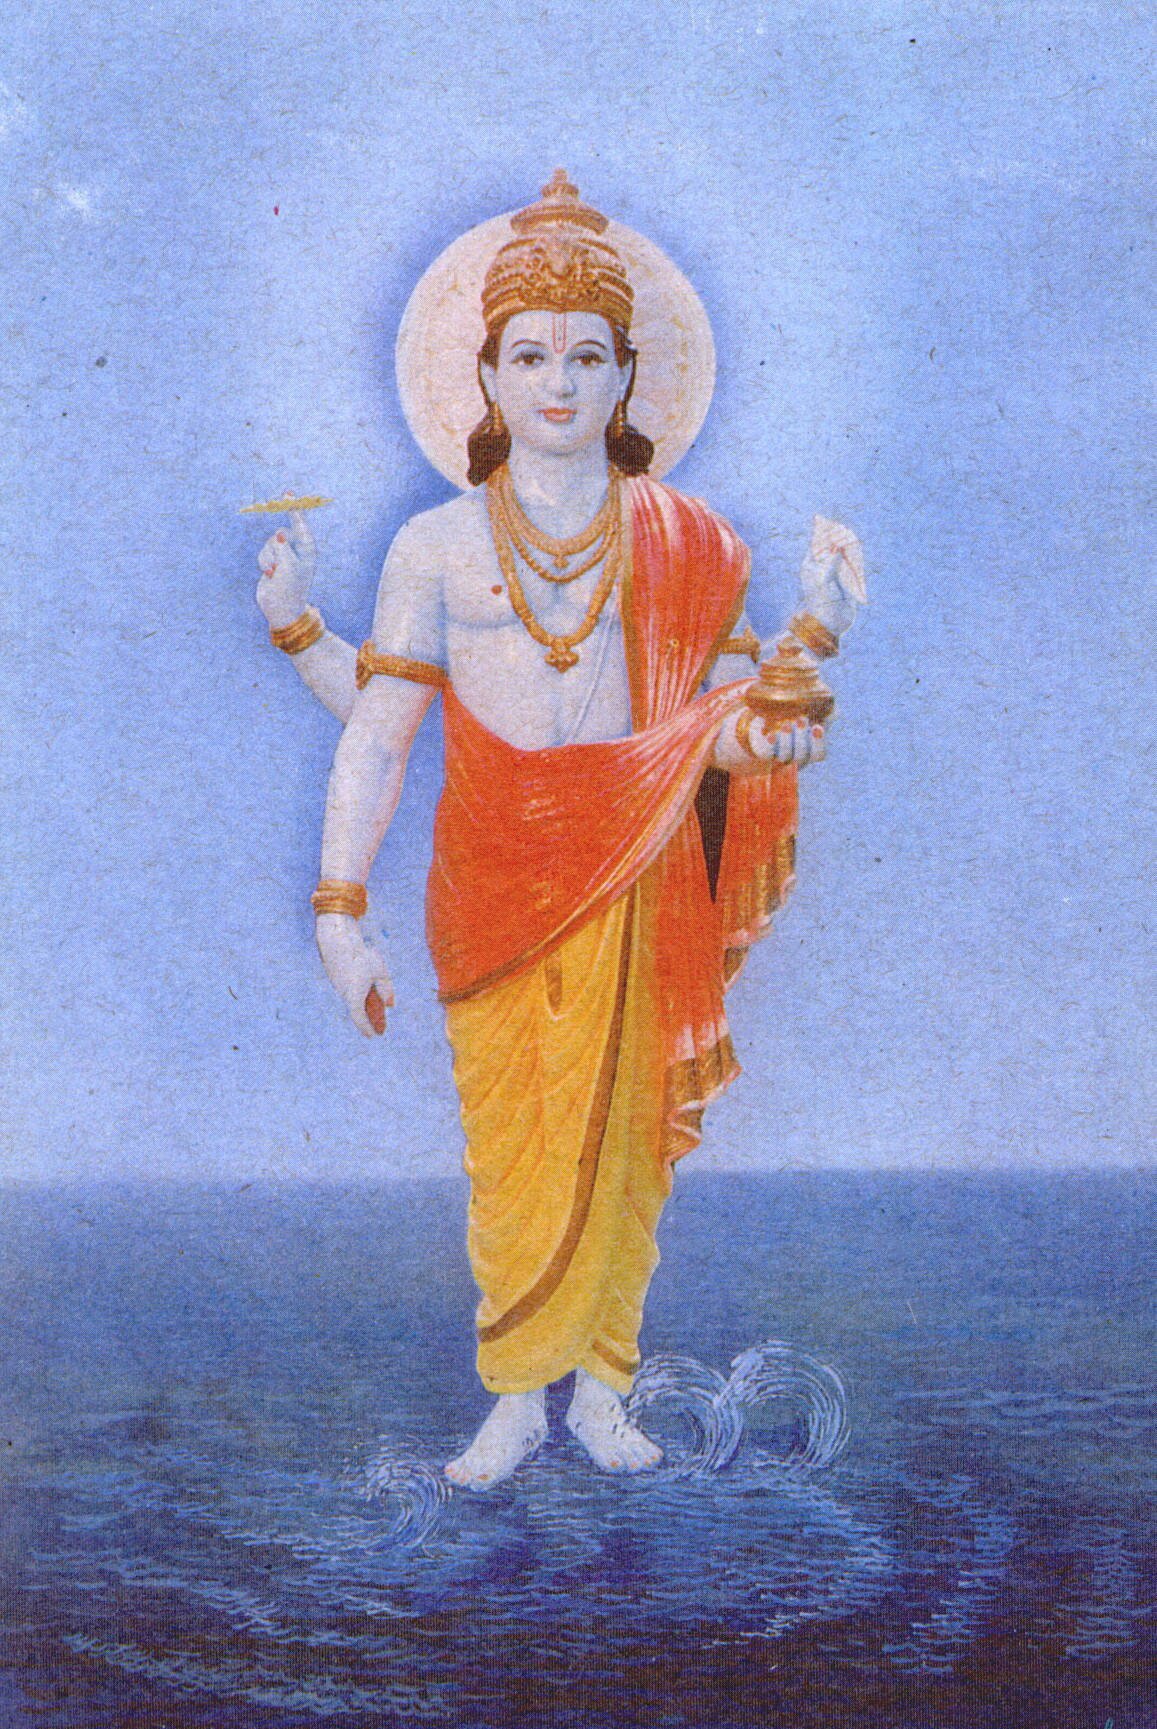 Lord Dhanvantari gave the knowledge of Ayurveda to Sushruta, the first Ayurvedic surgeon. Traditionally in his four hands are: a leech, a vessel of immortality-gaining nectar, a conch shell, and a sphere of energy. Here the fourth hand contains an unknown item, perhaps the famous haritaki fruit. These items represent important Ayurvedic medicines. These herbs, etc. help us carry out our mission to bring wholistic healing to all. Each symbolizes a different approach to treatment, cleansing, rejuvenation, spiritual etc. Ayurvedic nutrition and life-style are their primary expressions, however. 